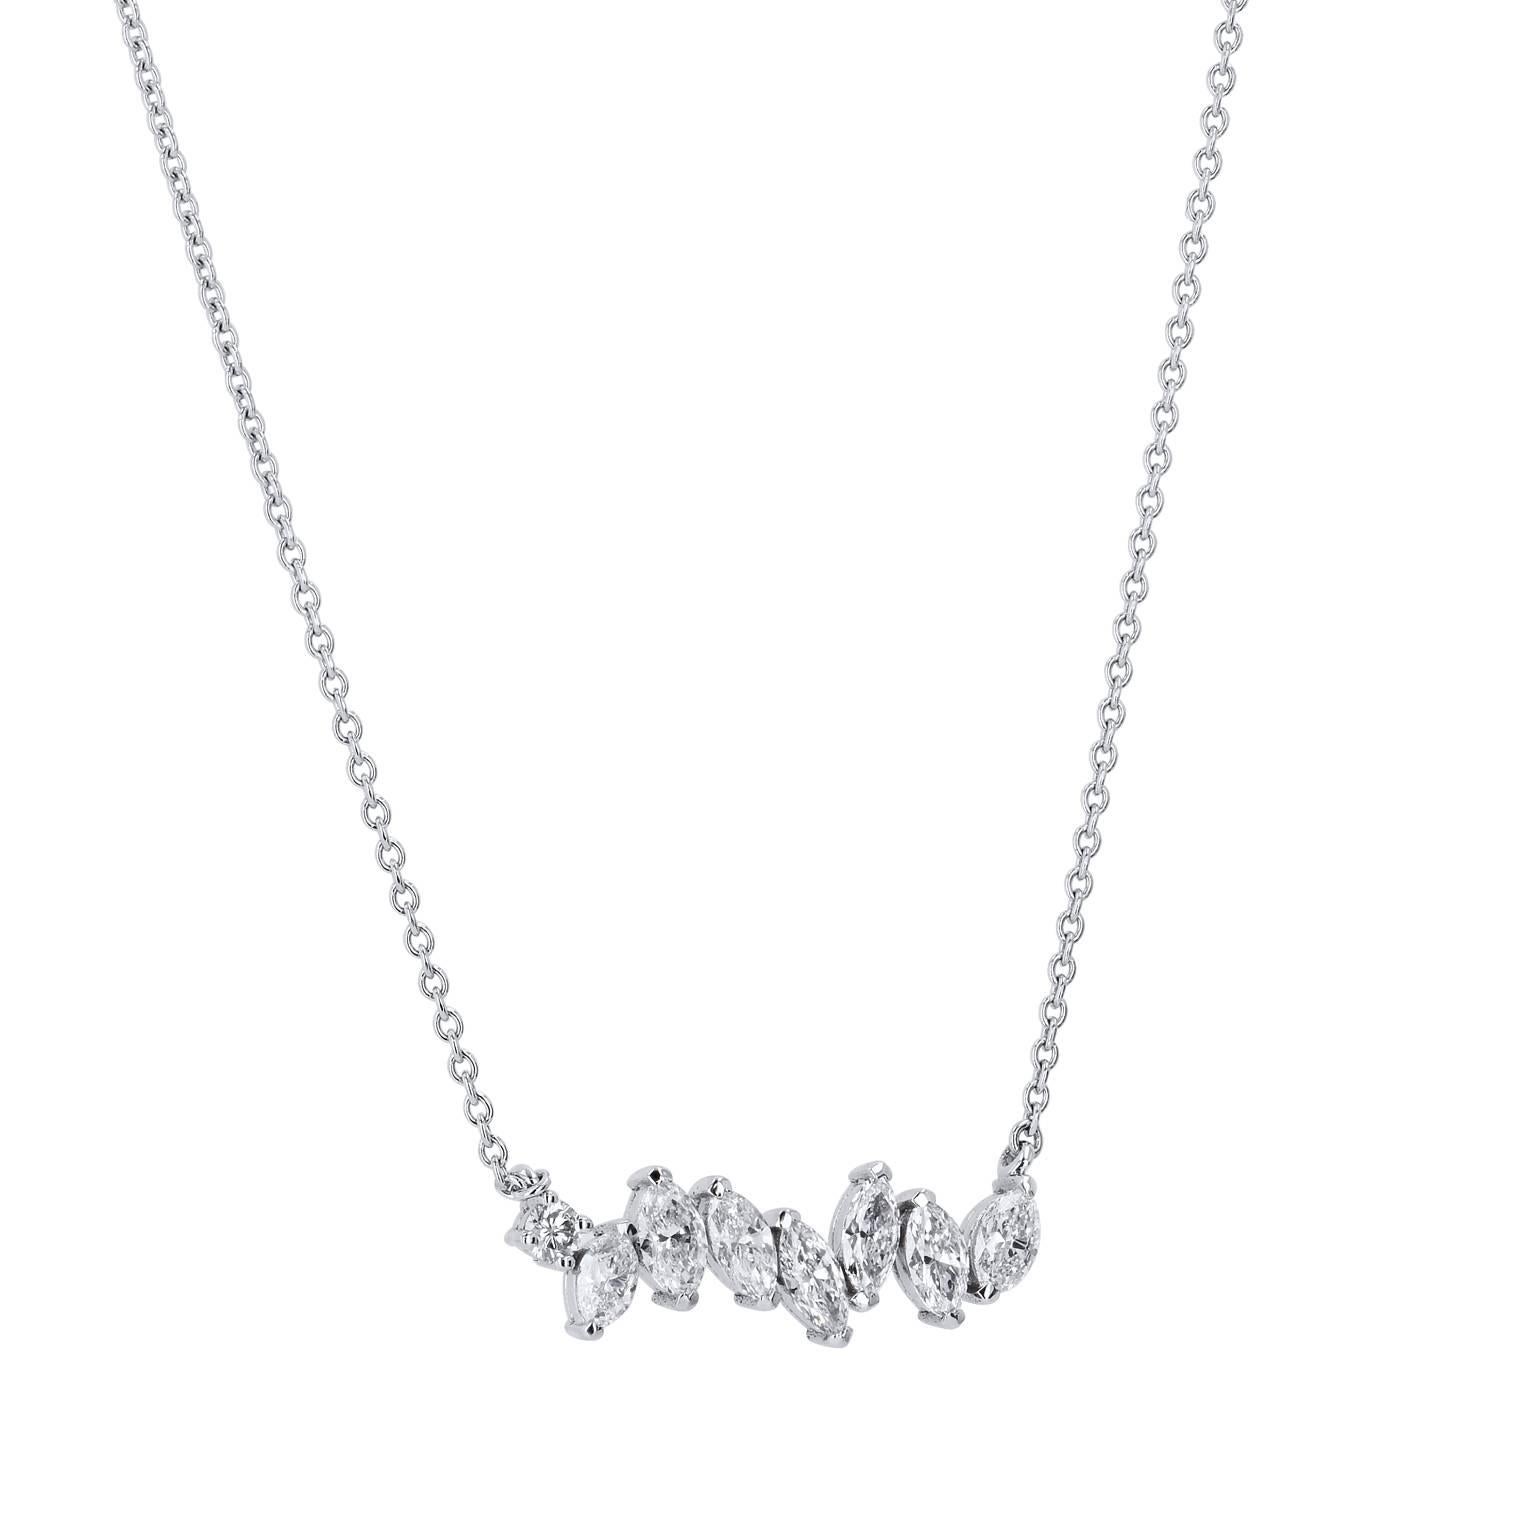 1.95 Carat Horizontal Marquis Diamond Pendant Bar Necklace

This stunning bar necklace has a total weight of 1.95 carats prong-set marquise diamonds.  
The beautiful diamonds are surrounded by 18 karat white gold.
The necklace measures 17 inches.  